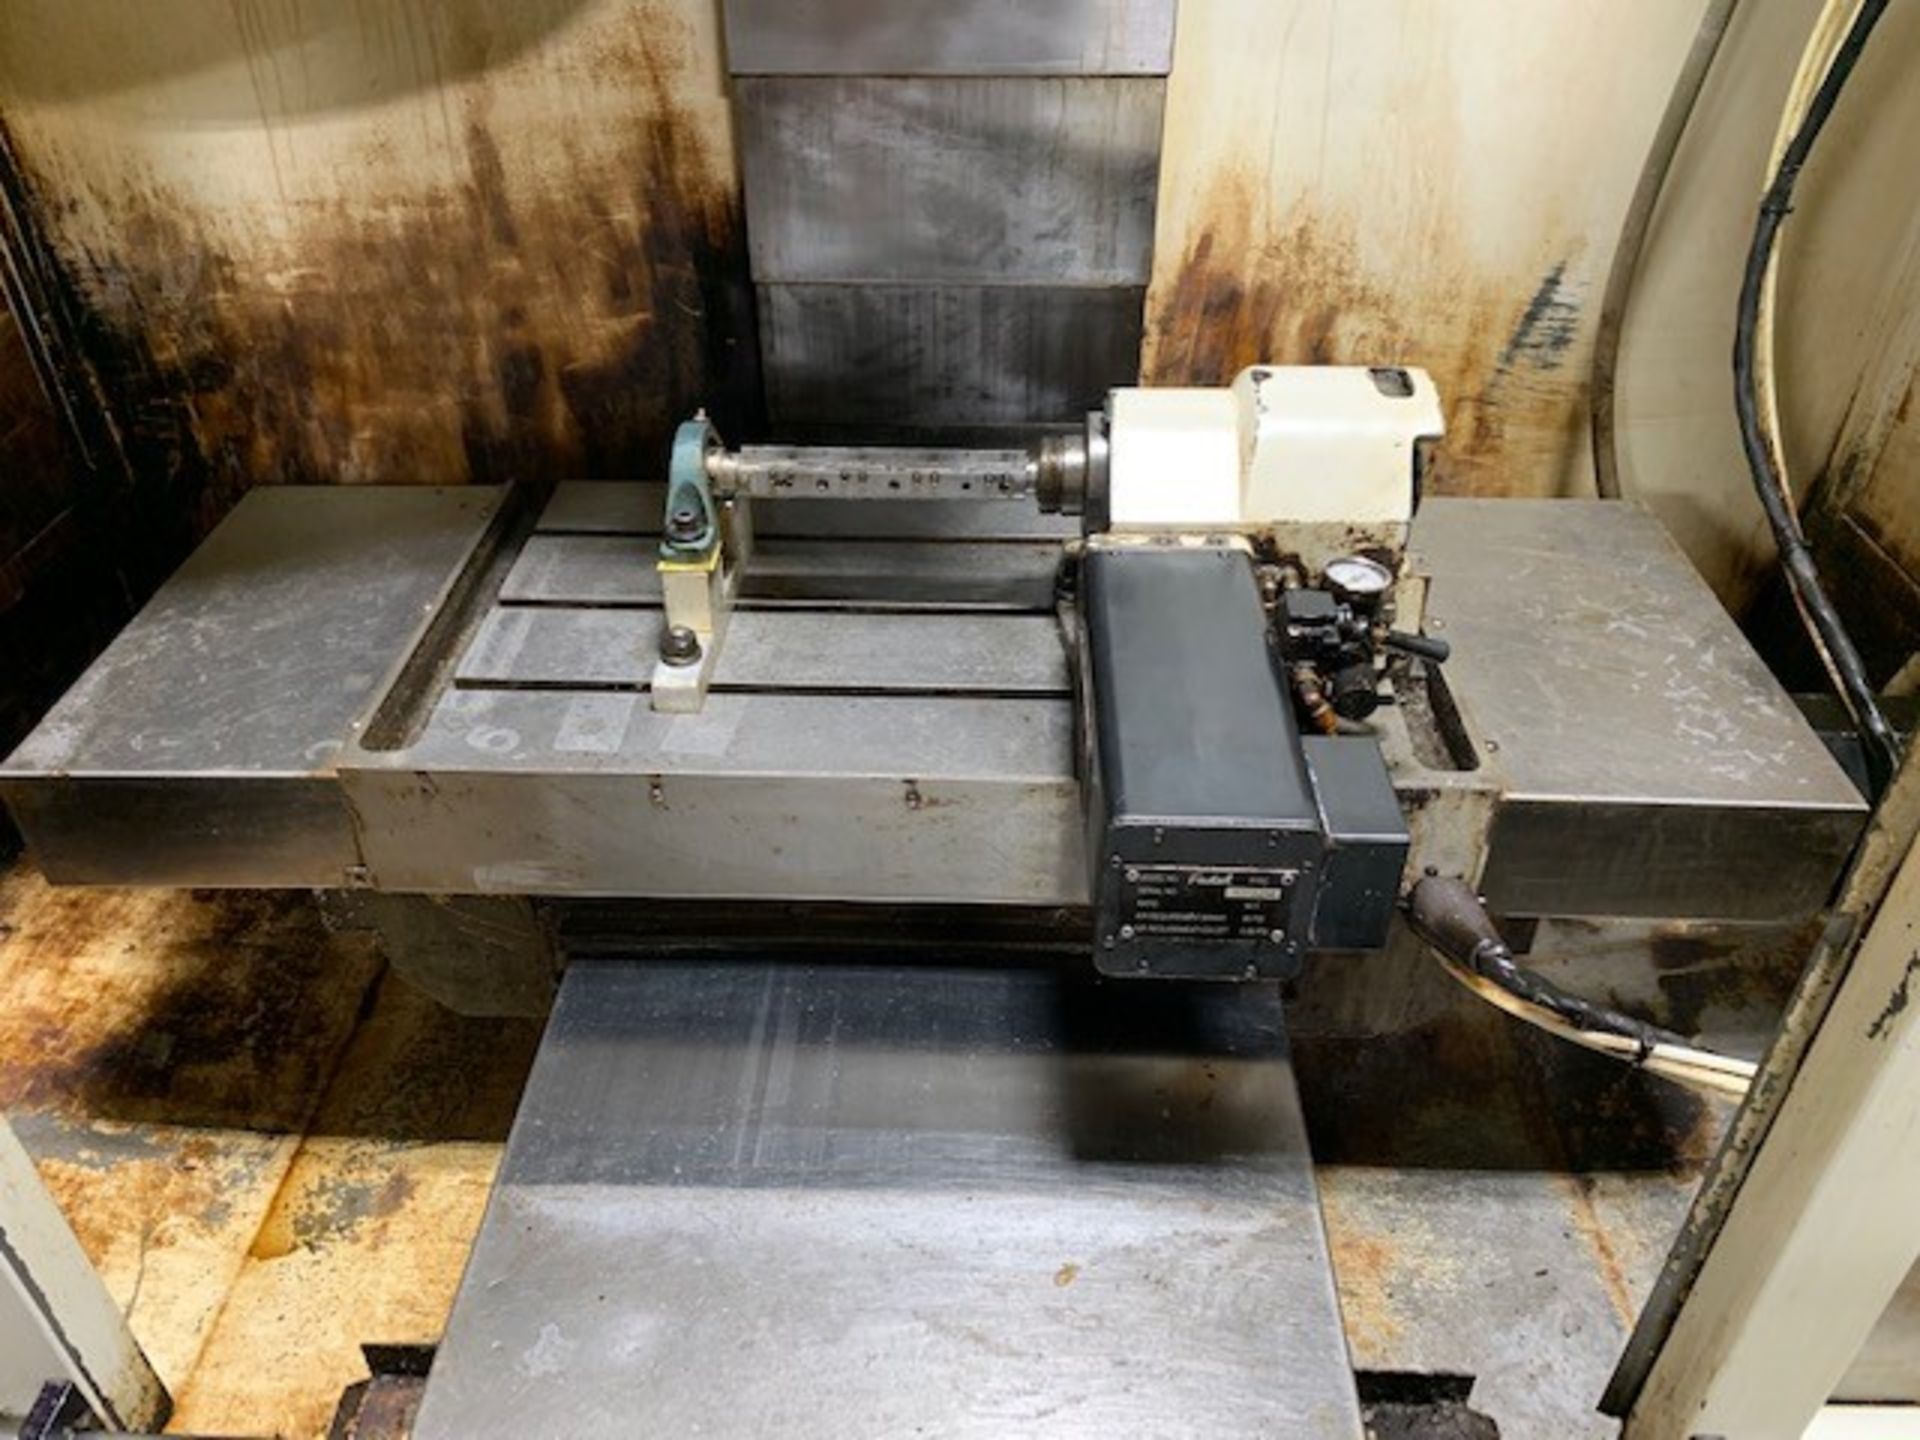 1995 FADAL VMC15 VERTICAL MACHINING CENTER, S/N 9508545, MDL. 914-15, CNC 88HS CONTROL, SPDL. SPEED - Image 3 of 12